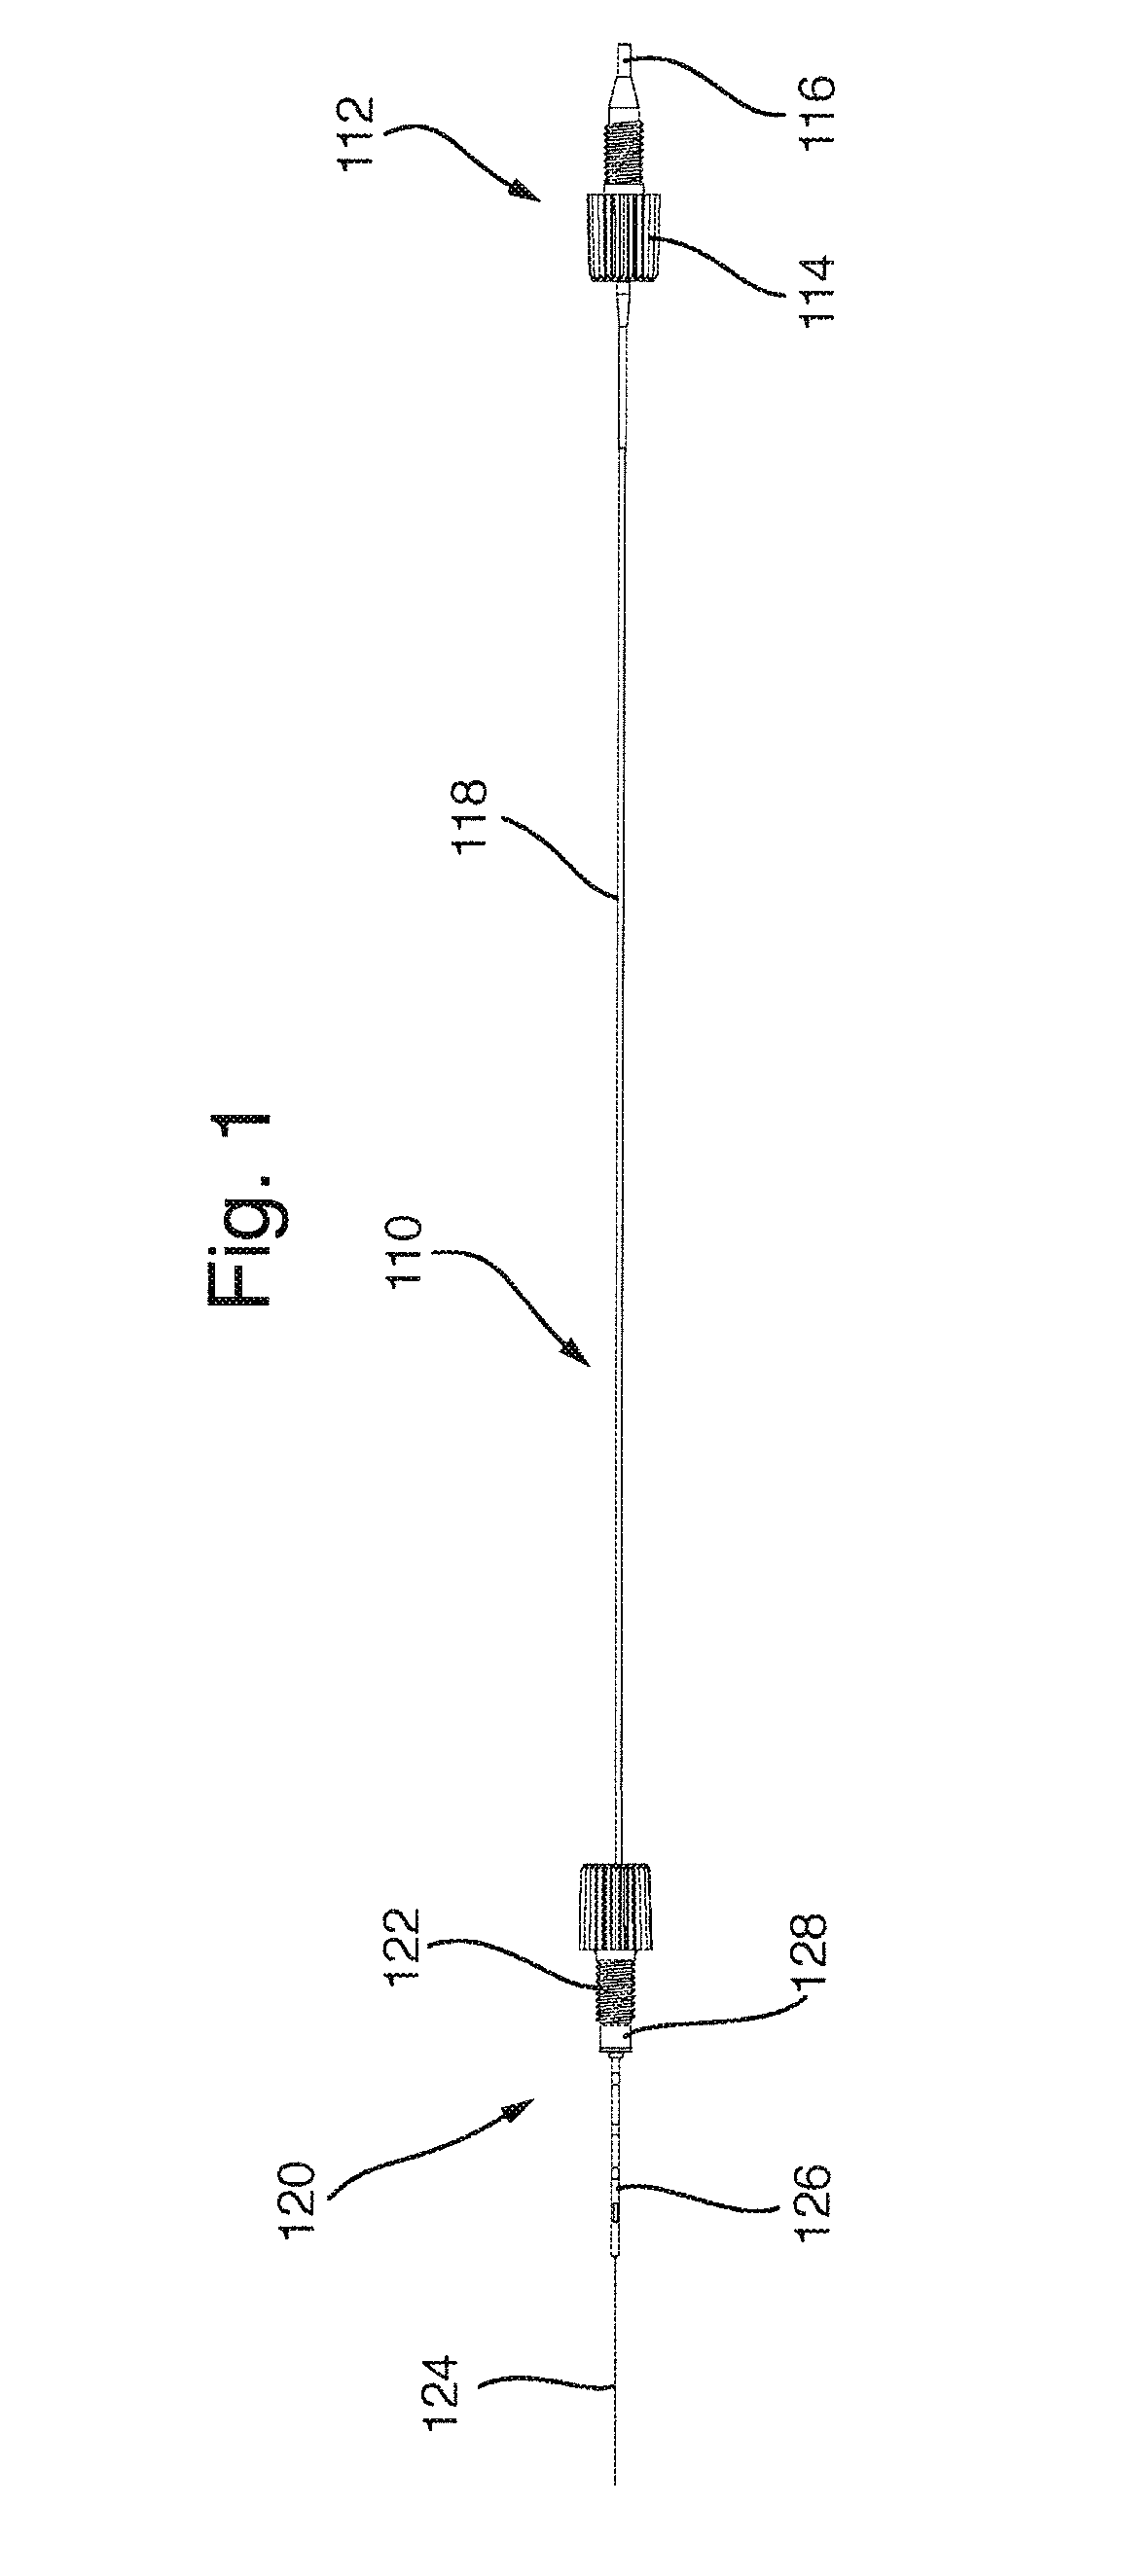 Probe Assembly for Attaching a Chromatography Device to a Mass Spectrometer